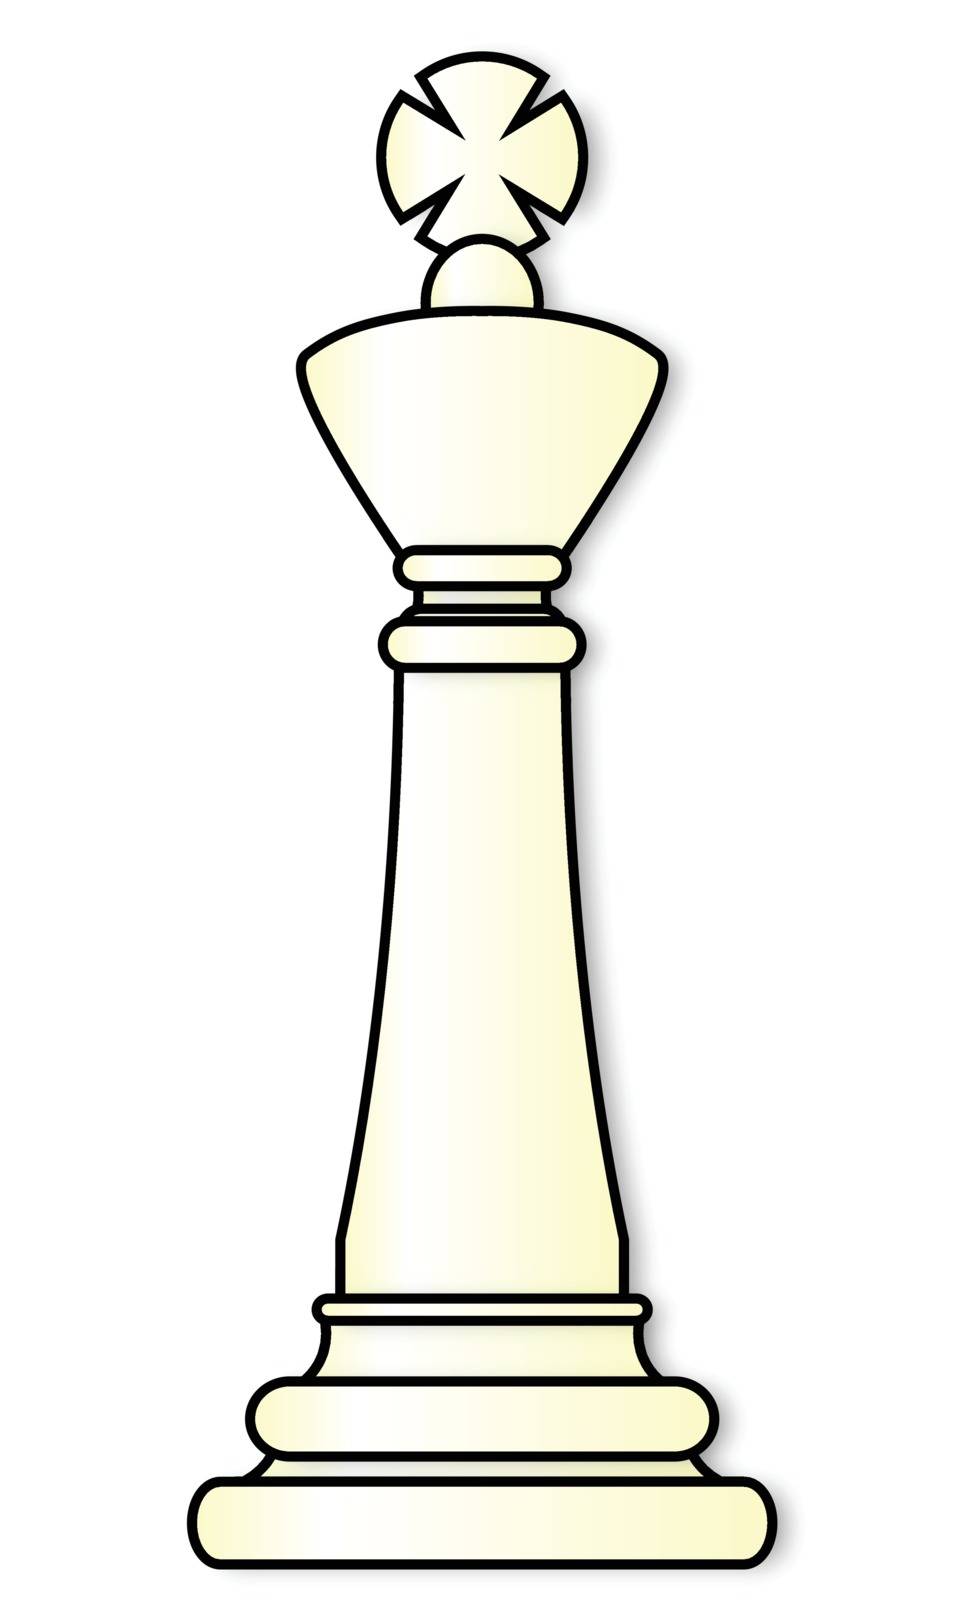 King chess piece over a white background